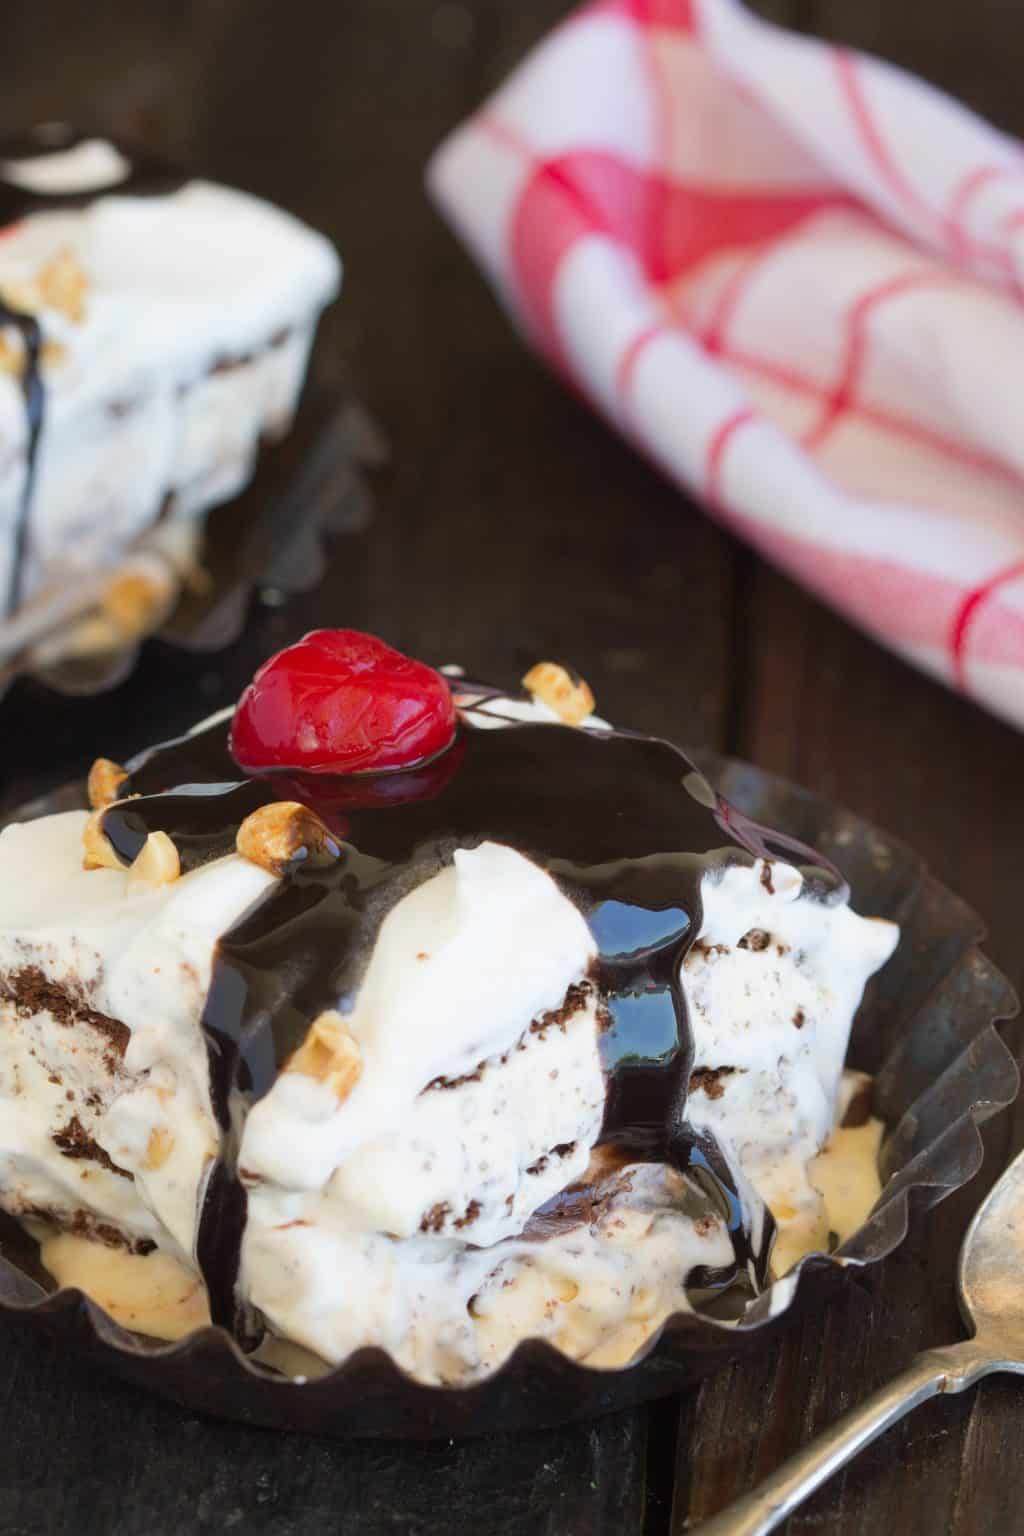 An ice cream sandwich dessert recipe is a basic no summer should be without. It's a sundae in a pan that can be customized any old way. 